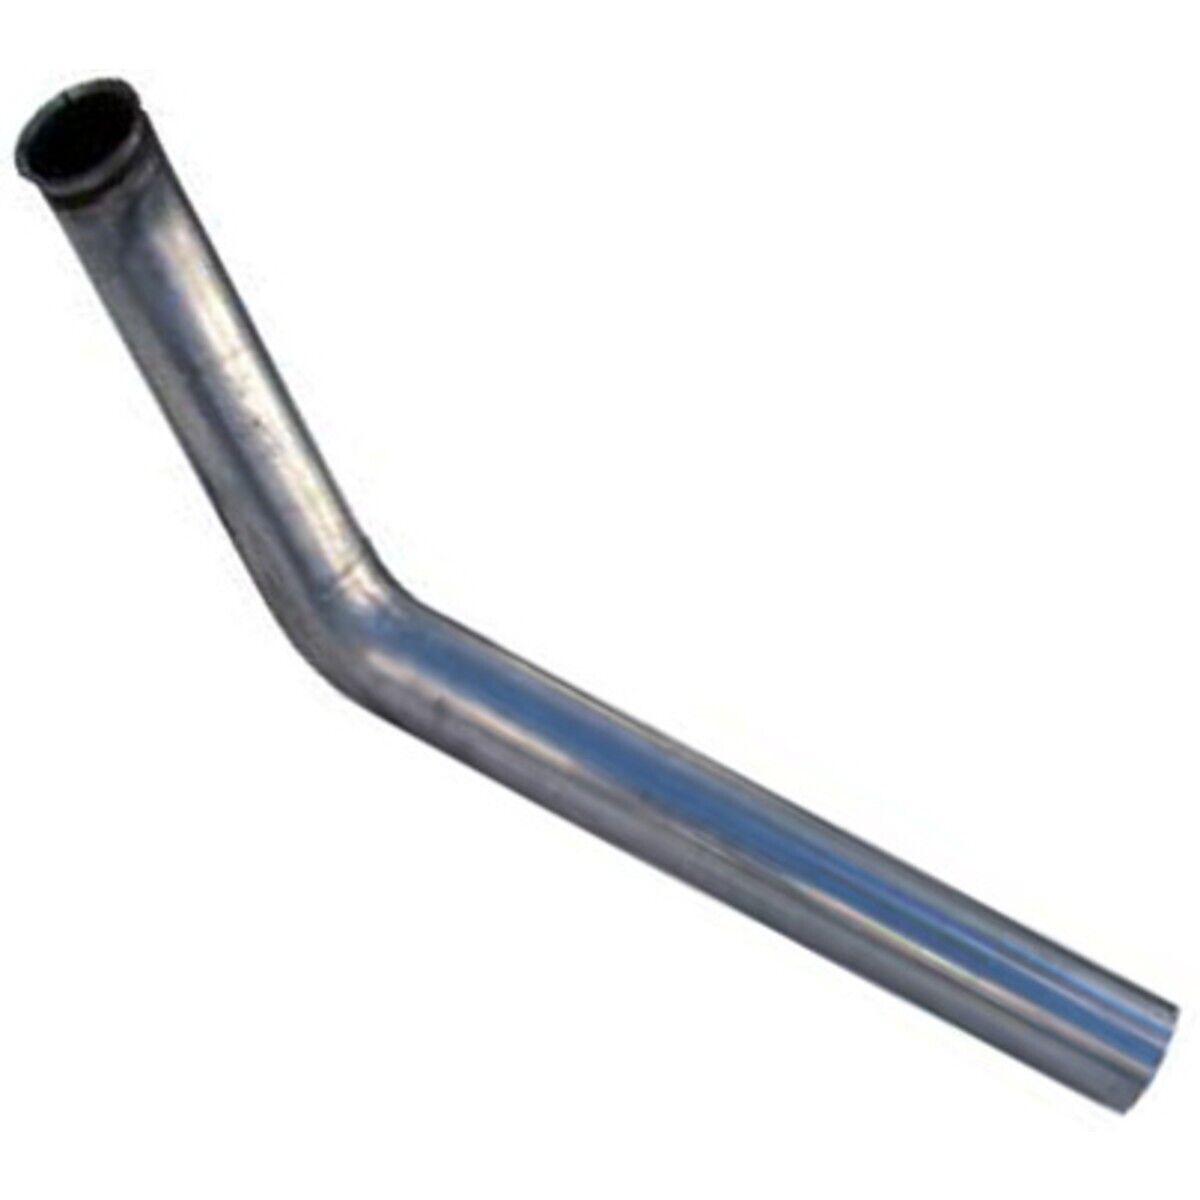 DAL405 MBRP Down Pipe for Ram Truck Dodge 2500 3500 2003-2004